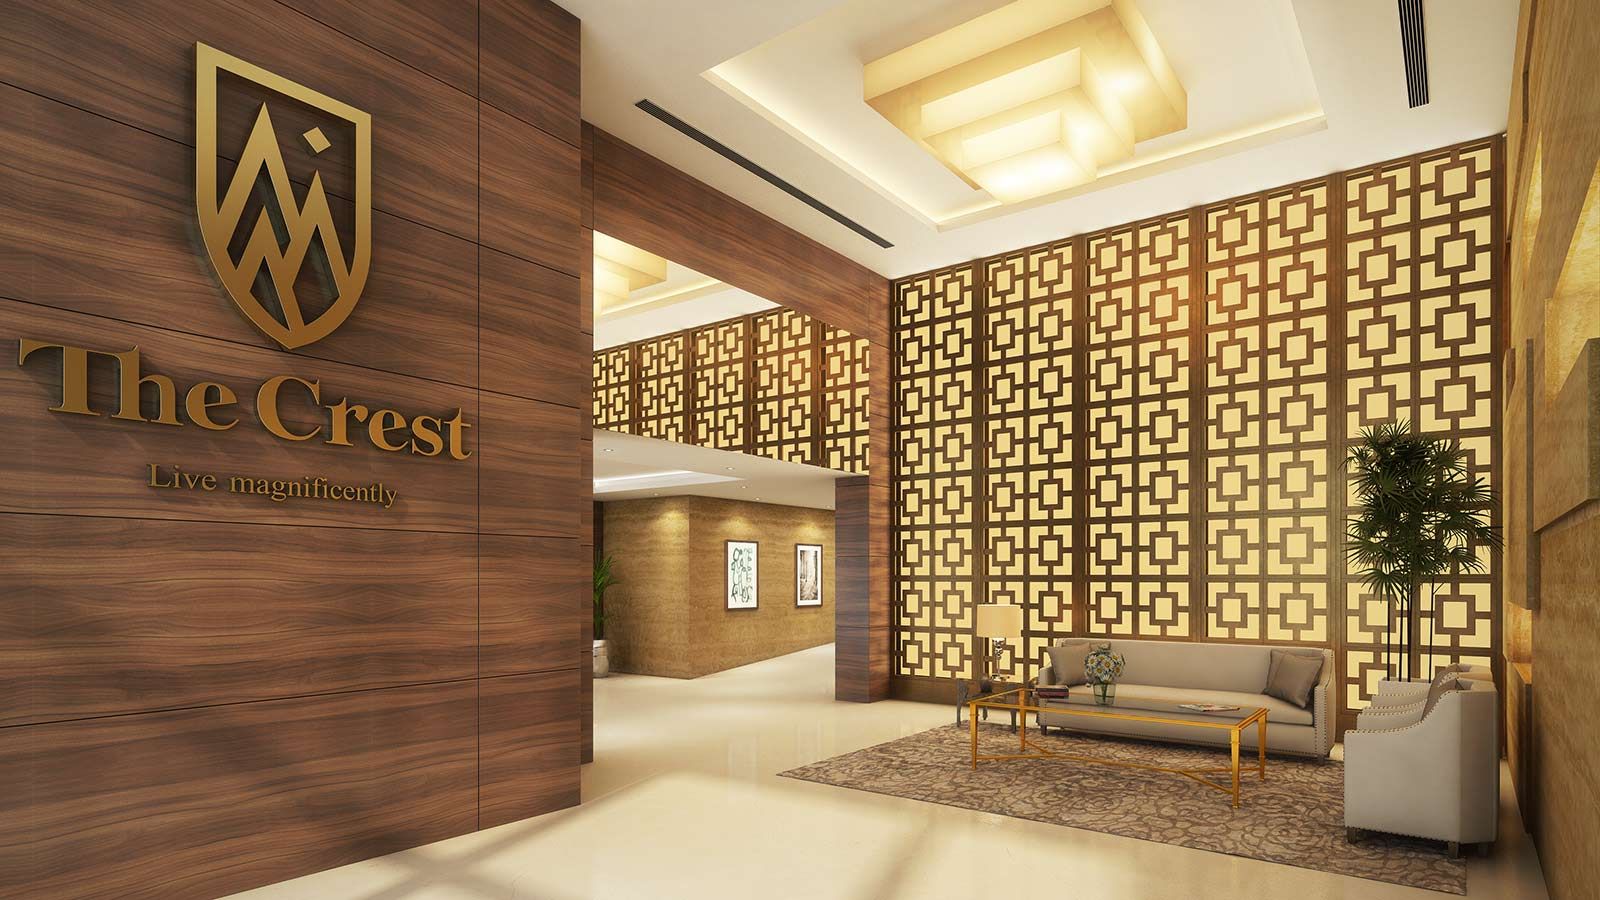 Inside The Crest Luxury Residential Apartments - Mace Group